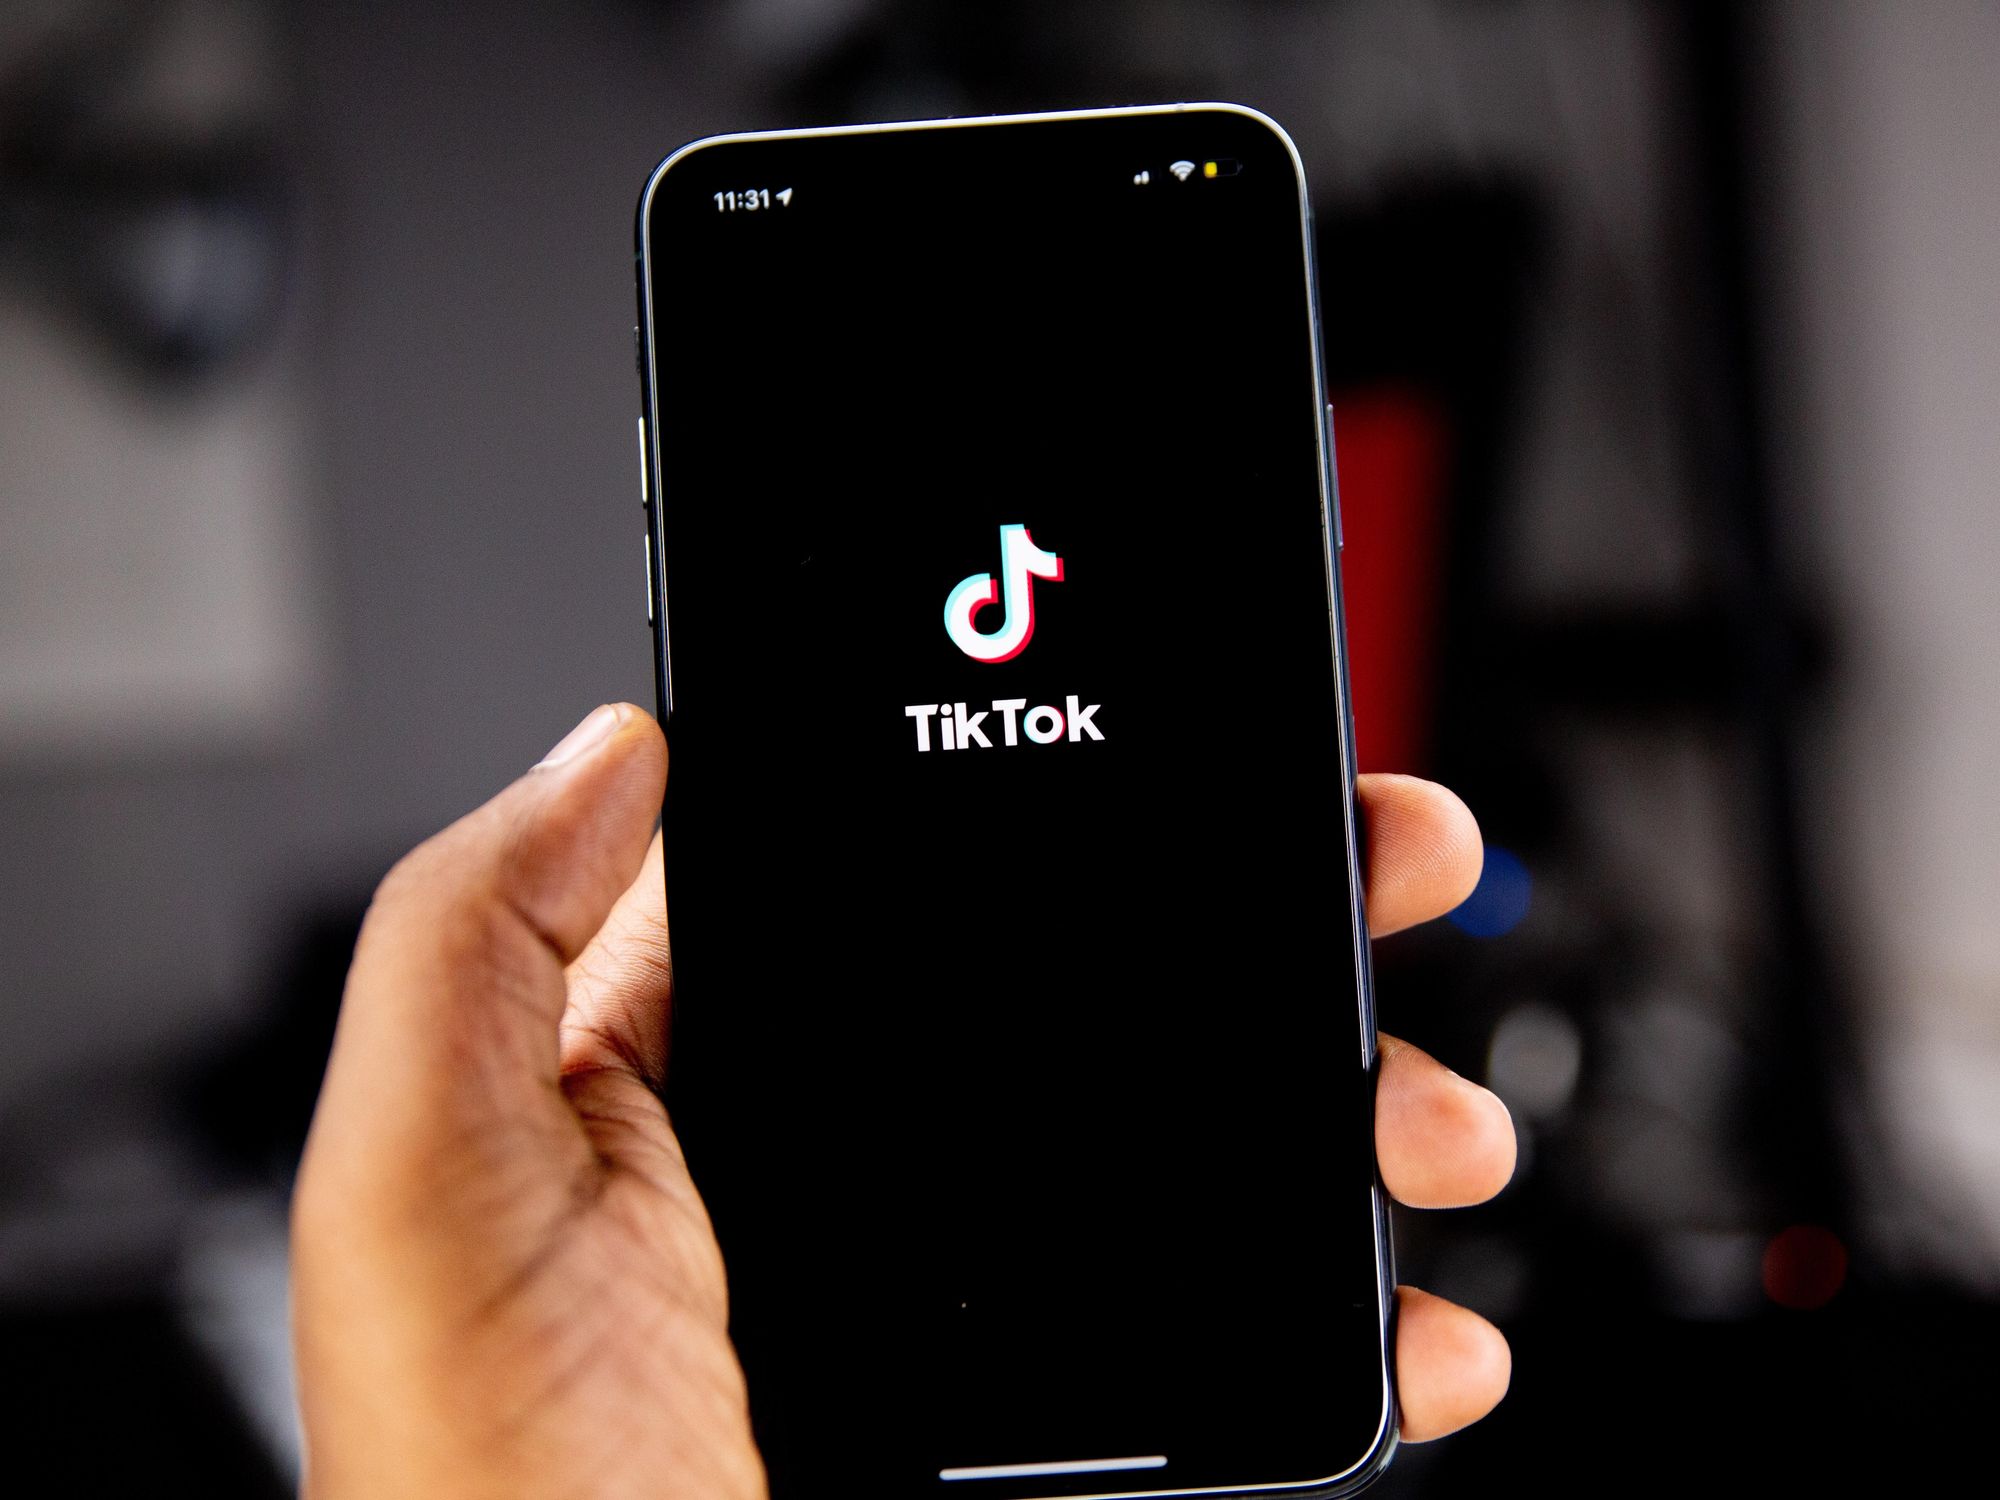 High Quality TikTok Ad Accounts And TikTok Business Center Accounts For Sale  Unlimited Daily Account Spend. Comes With Private Residenti